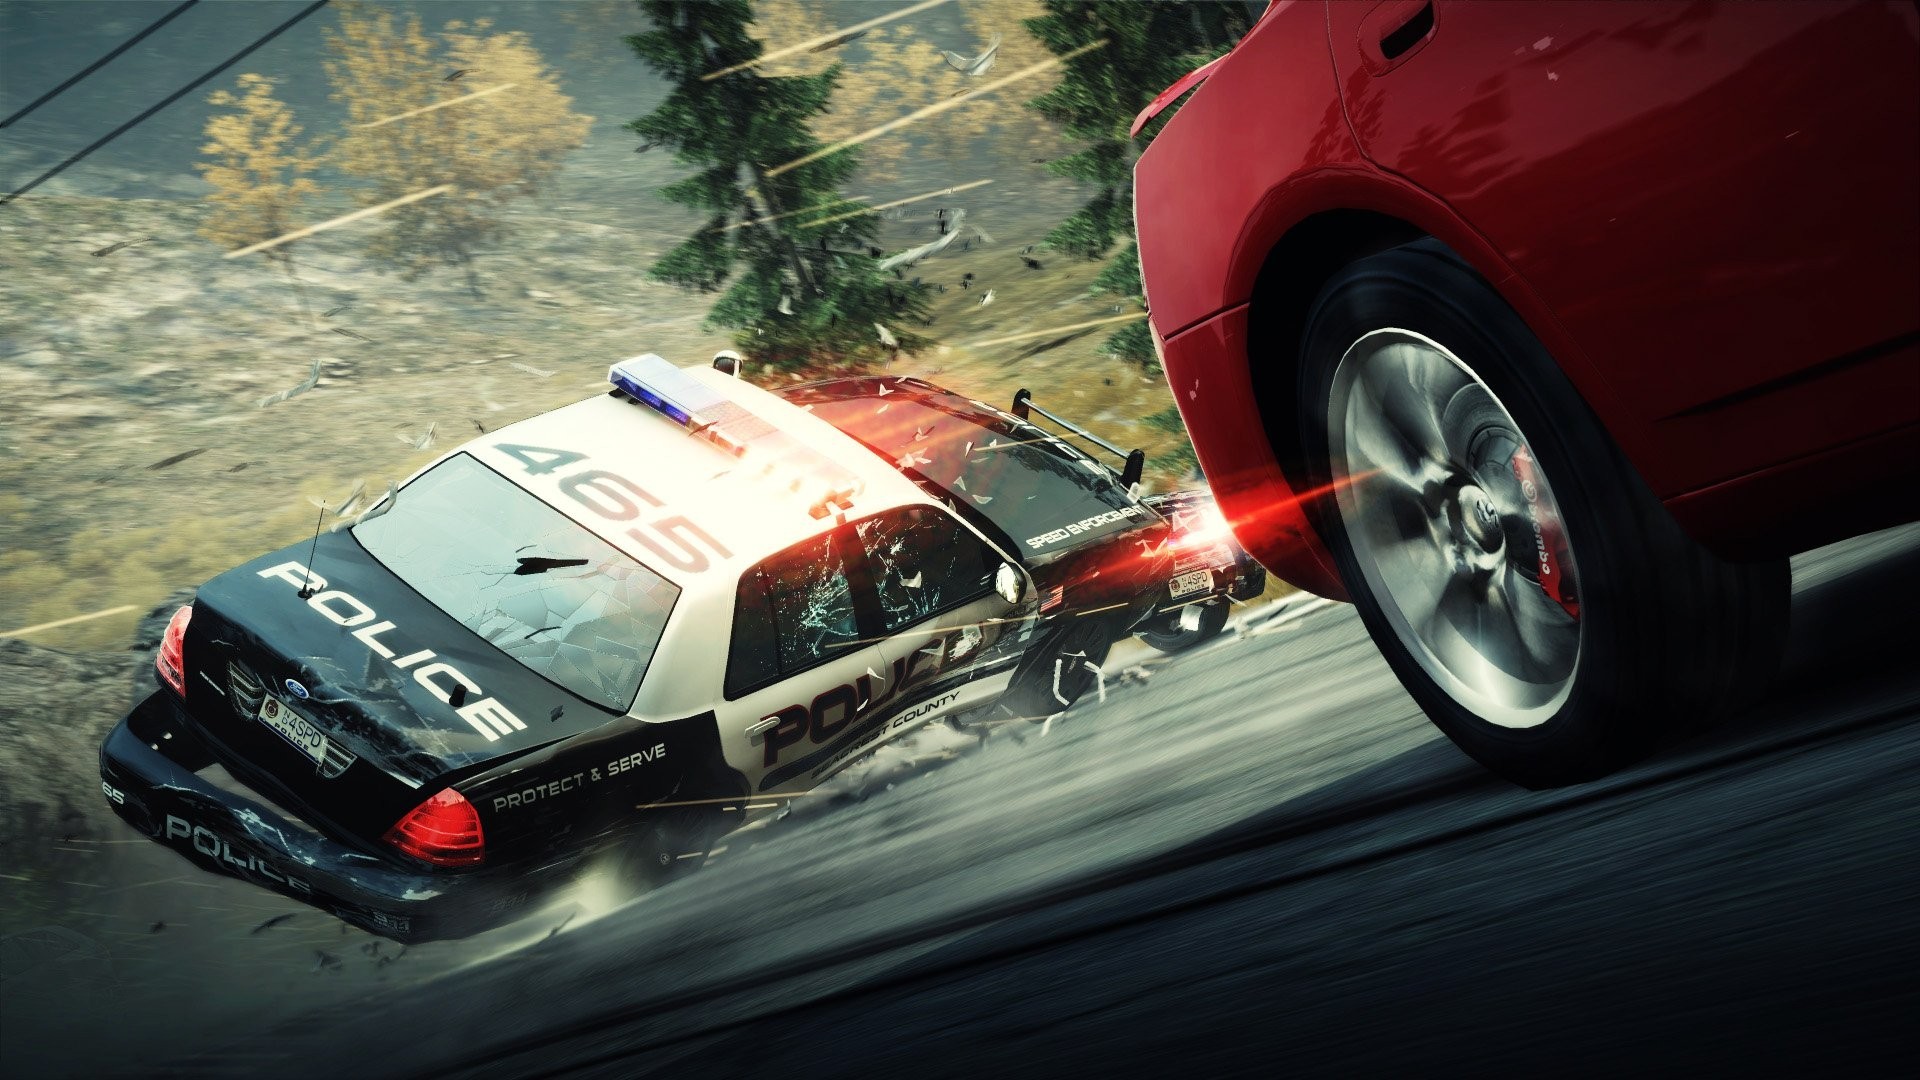 General 1920x1080 car video games Need for Speed: Hot Pursuit police cars screen shot crash Dodge Charger Dodge Ford Crown Victoria dutch tilt wheels chasing racing video game art red cars